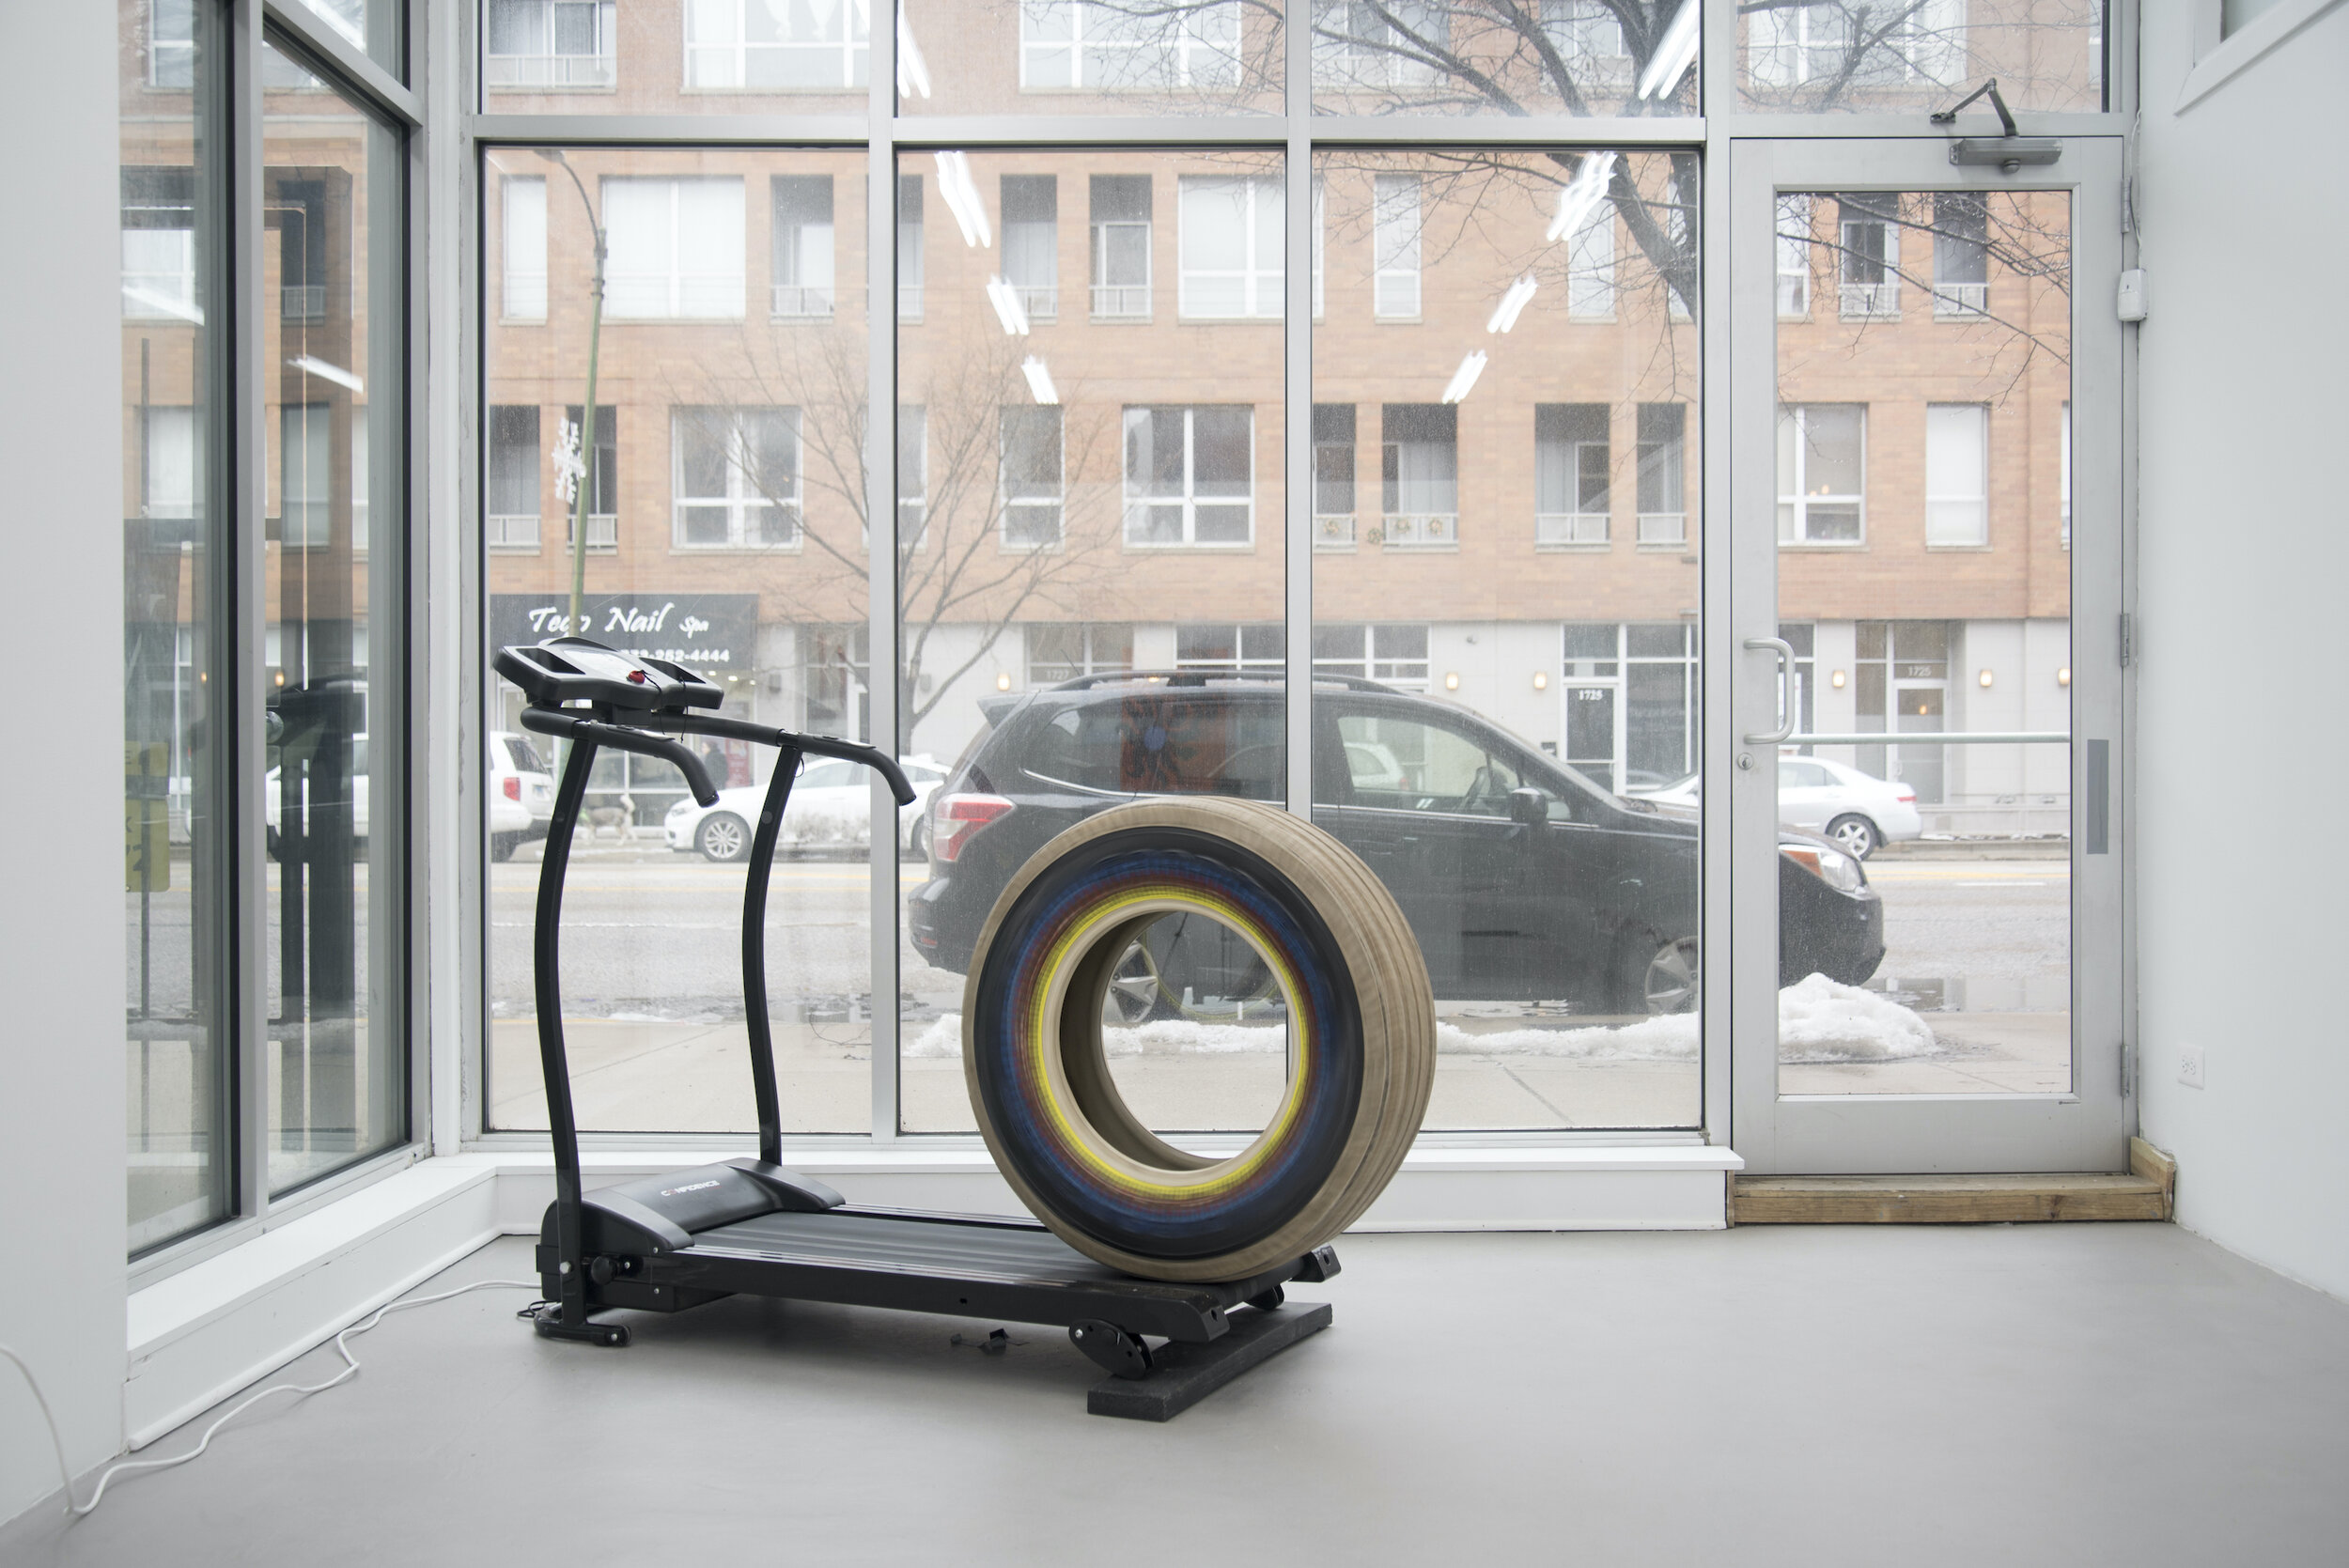  Gregory Bae,  24-7, 365 (#3) ​, 2015, treadmill set to 2.8 mph, acrylic and rubber on tire, wood  